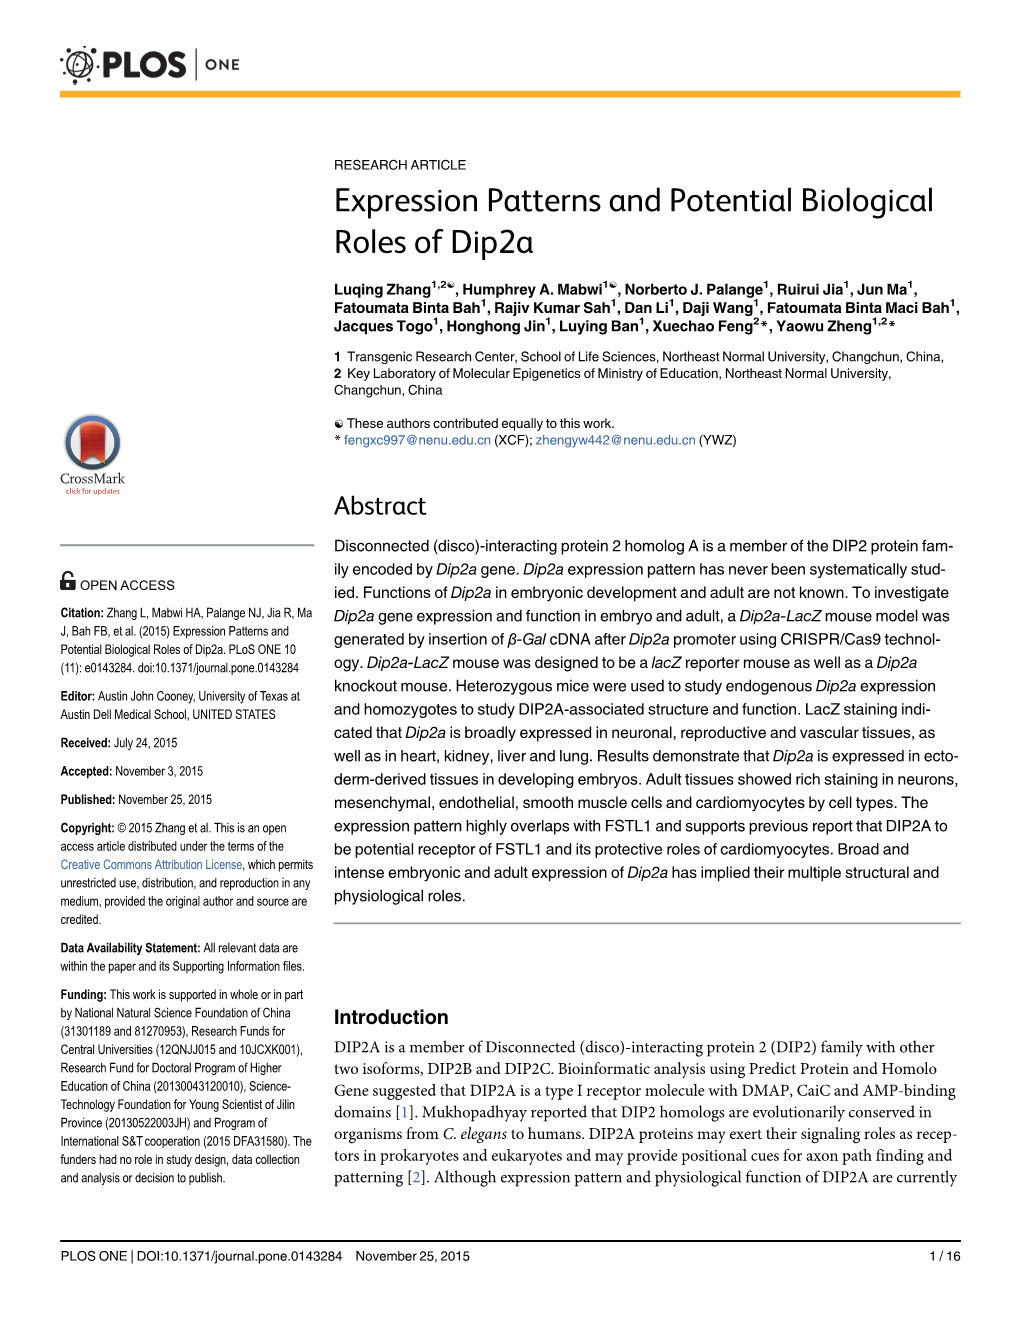 Expression Patterns and Potential Biological Roles of Dip2a